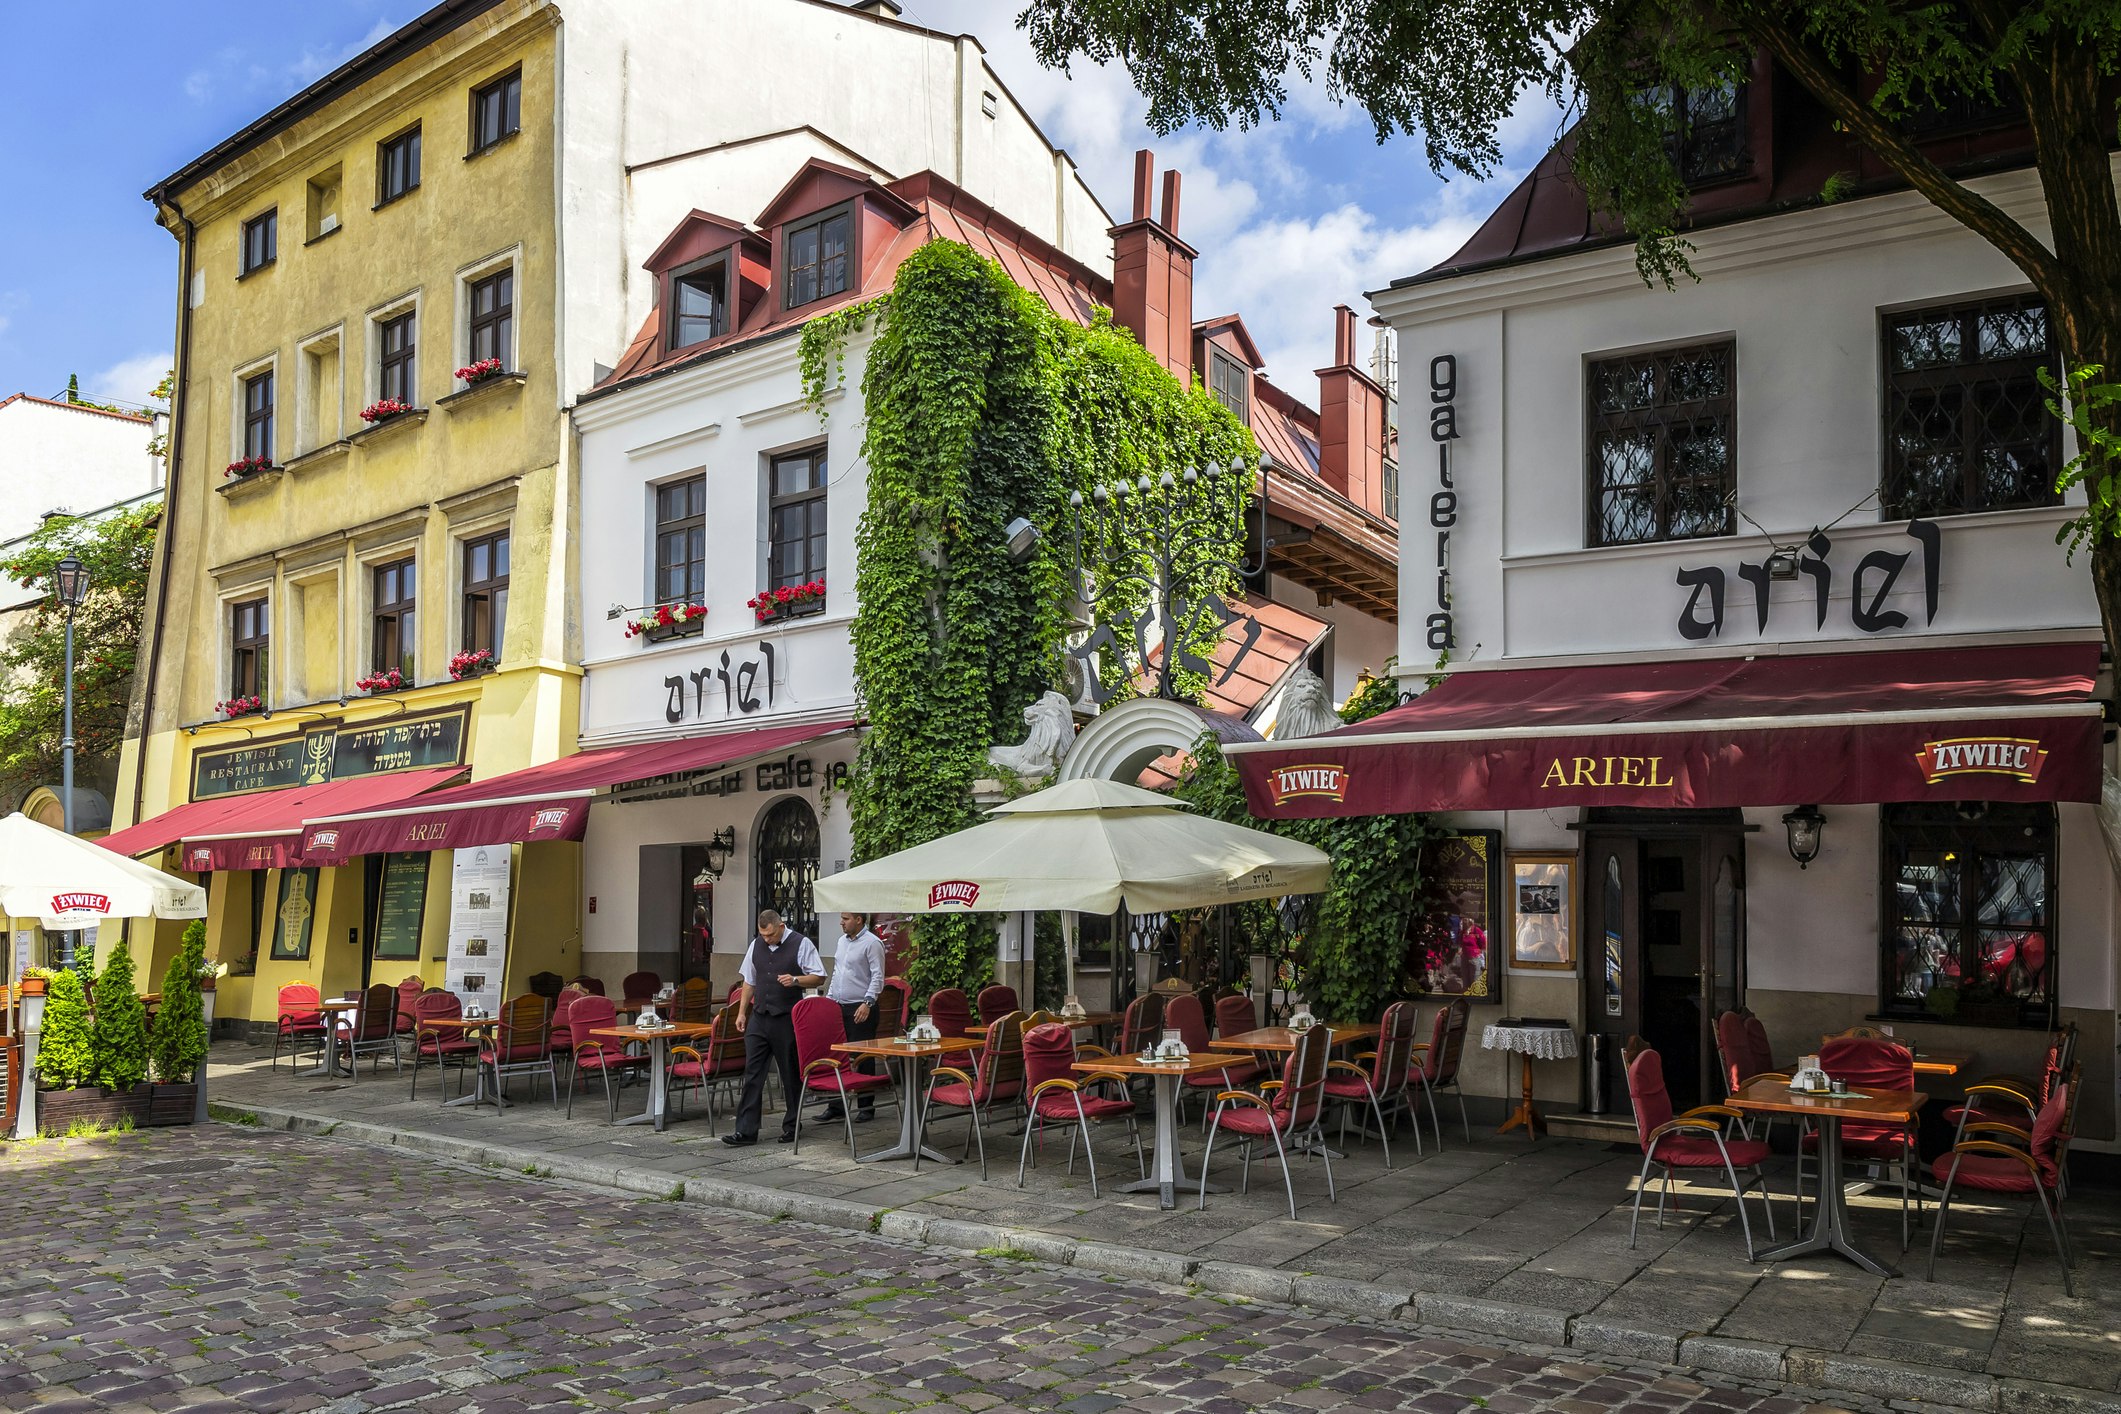 Jewish restaurant and cafe pub on a cobbled street in the Kazimierz district in Krakow, Poland